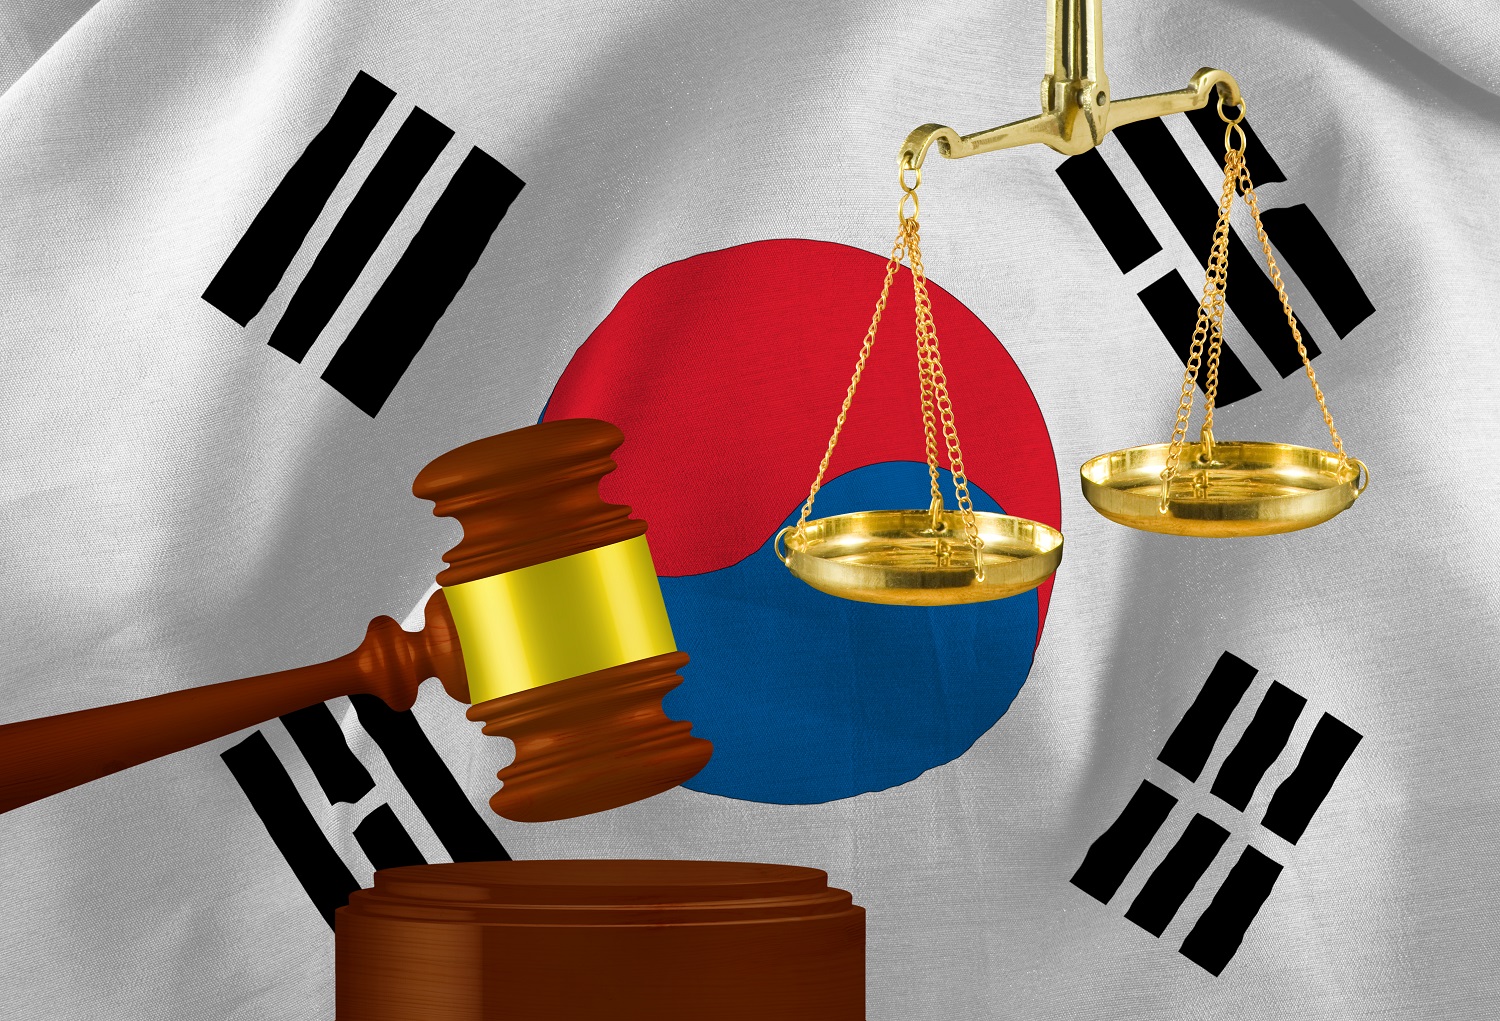 A judge&amp;amp;rsquo;s gavel and scales against a background of the flag of South Korea.